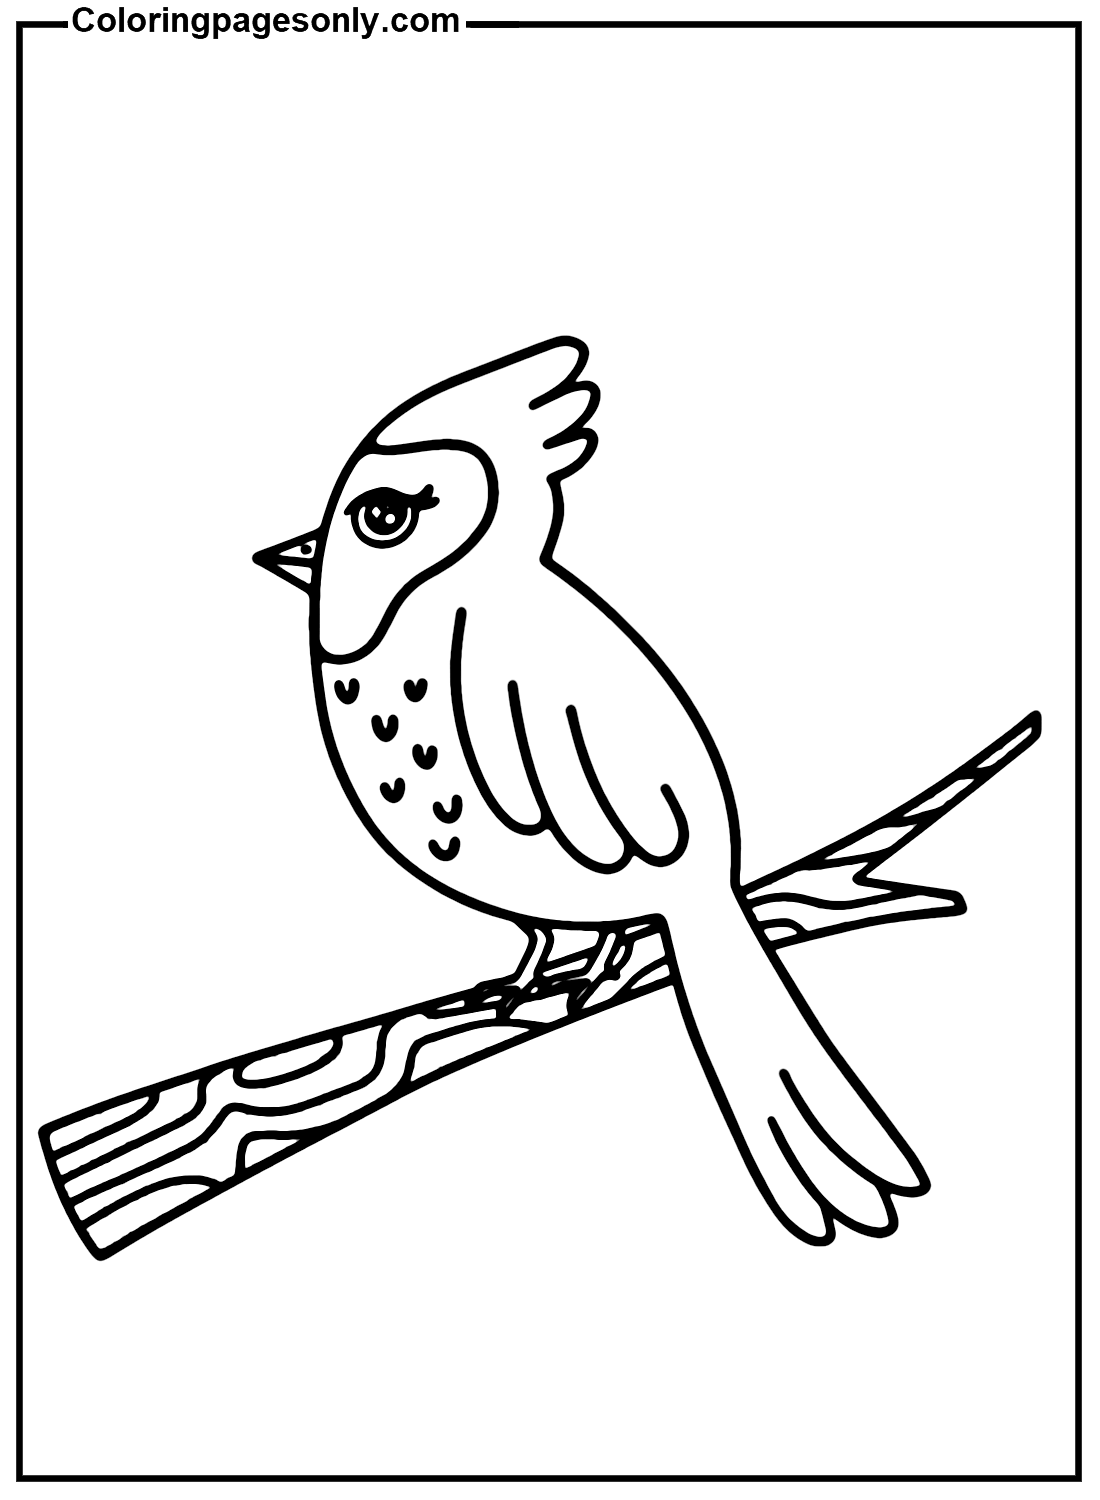 Free Cardinal Image Coloring Pages